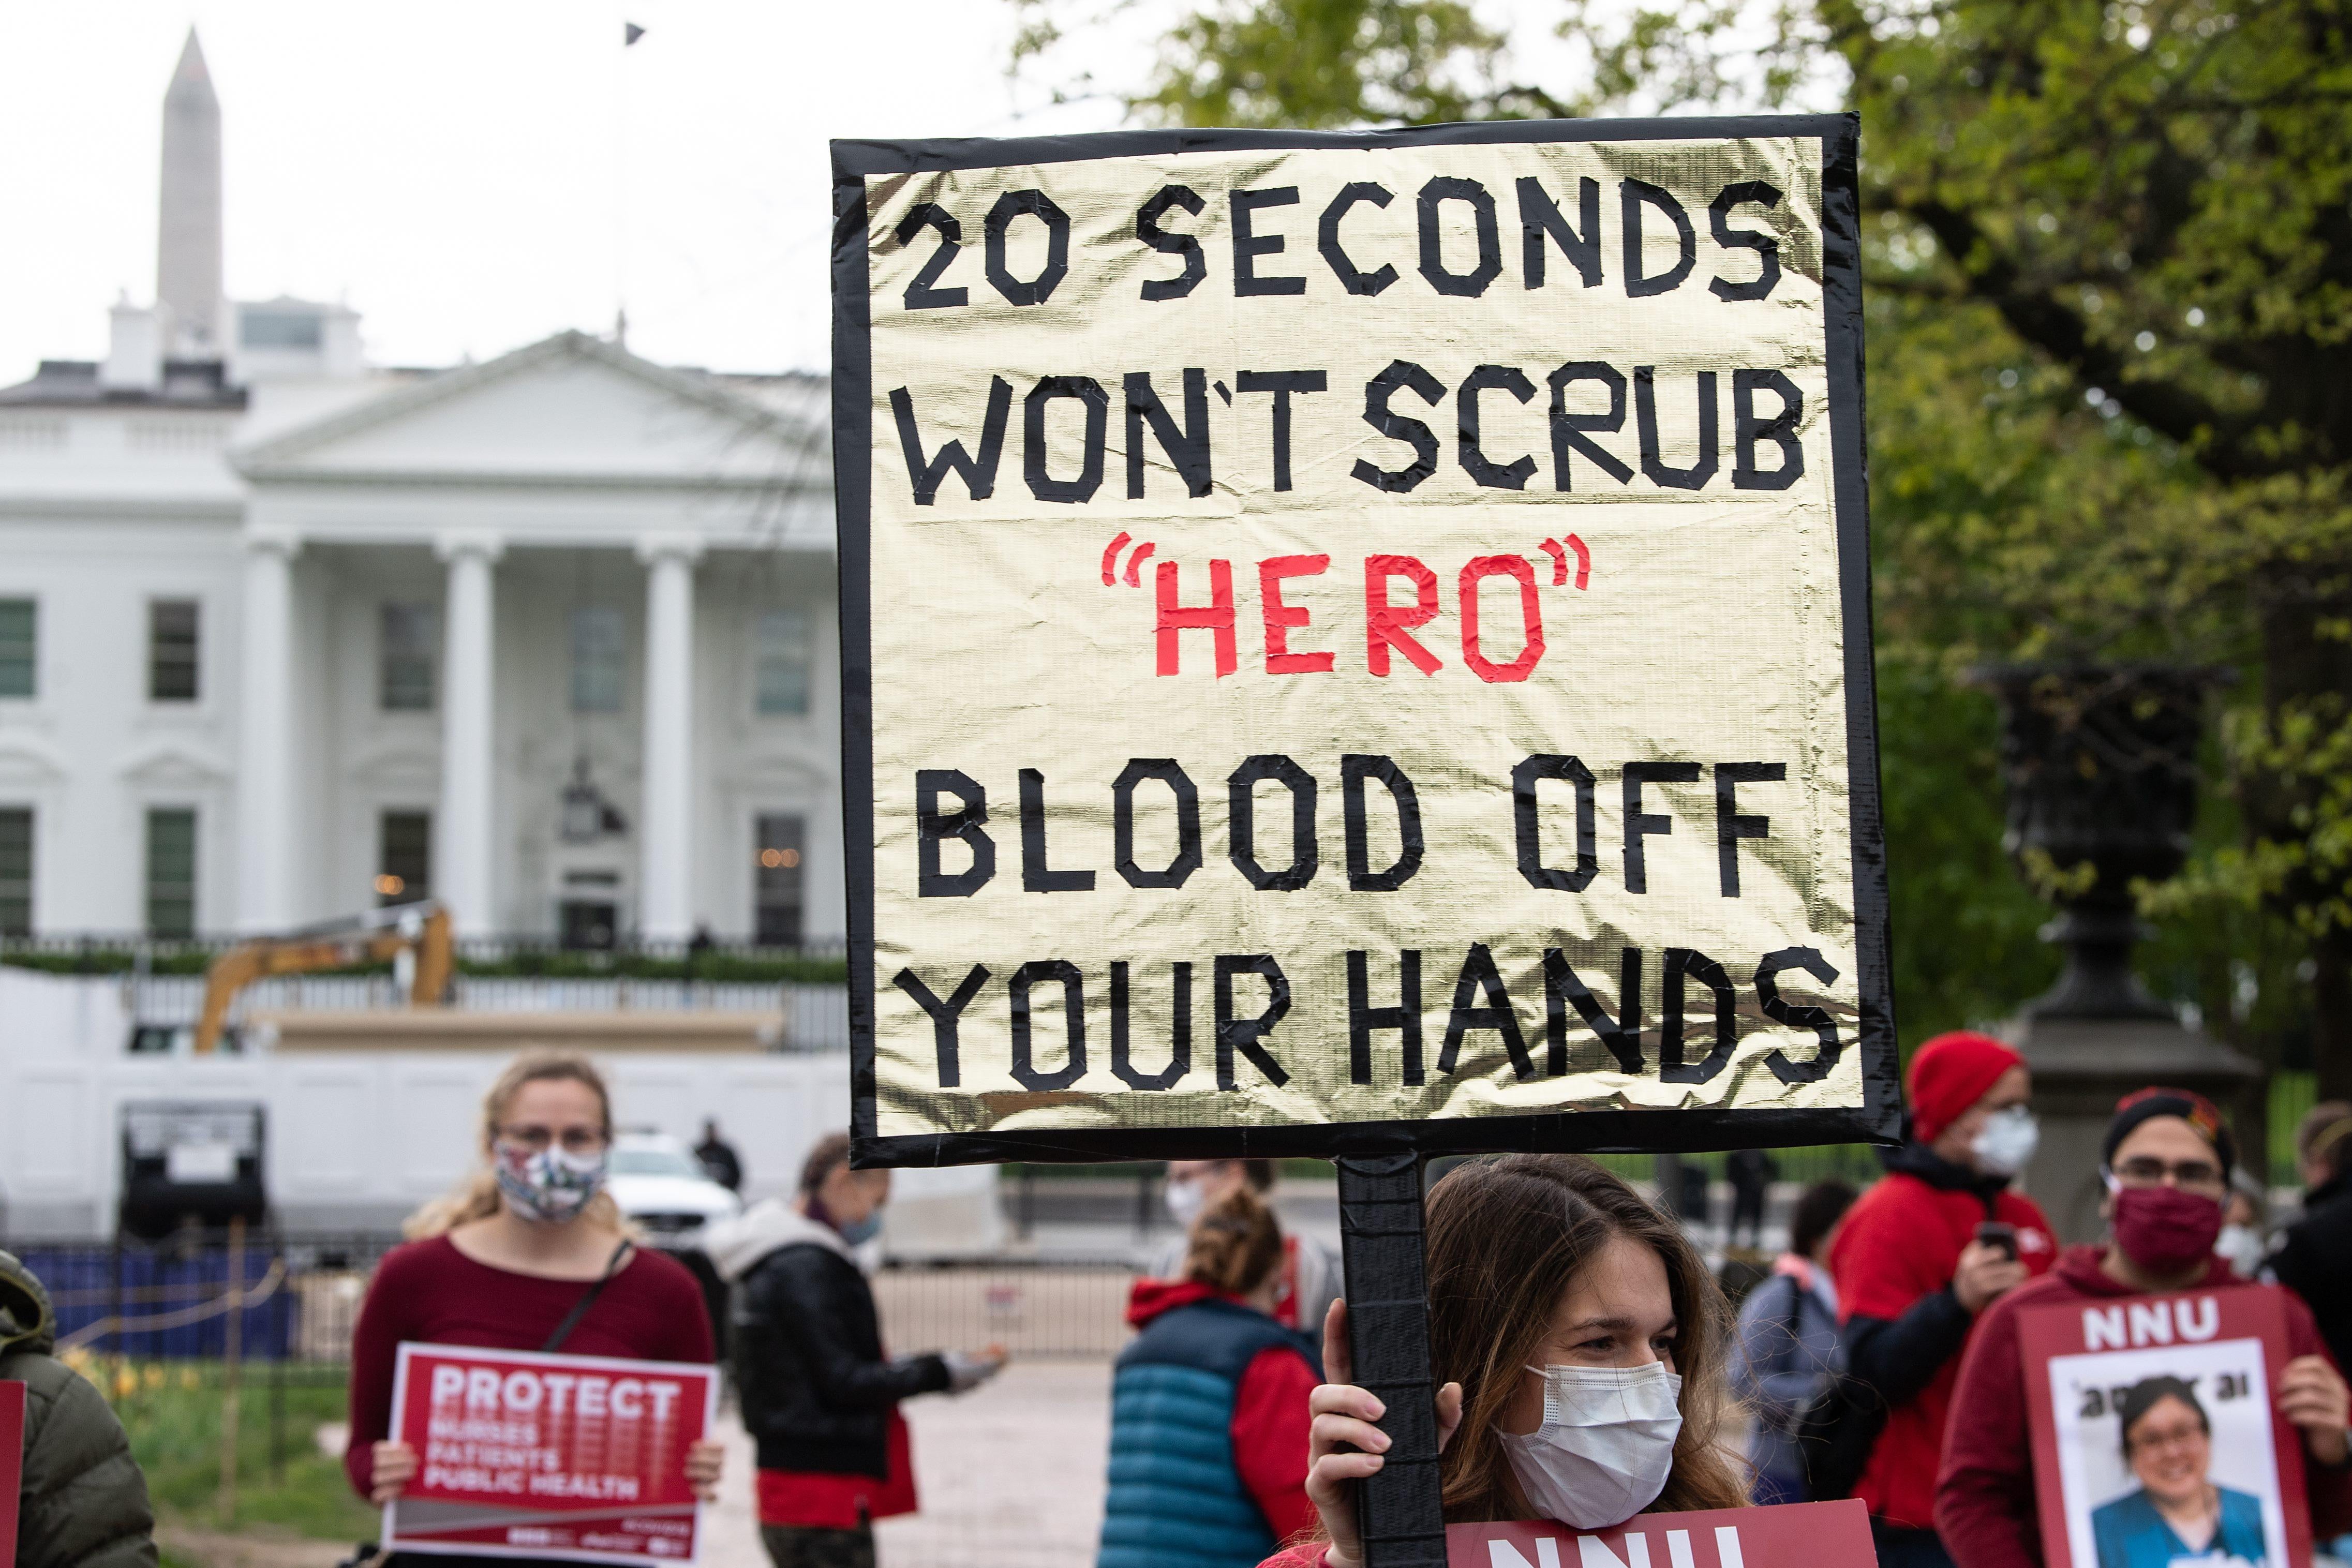 A protester holds a sign that reads "20 seconds won't scrub 'hero' blood off your hands"